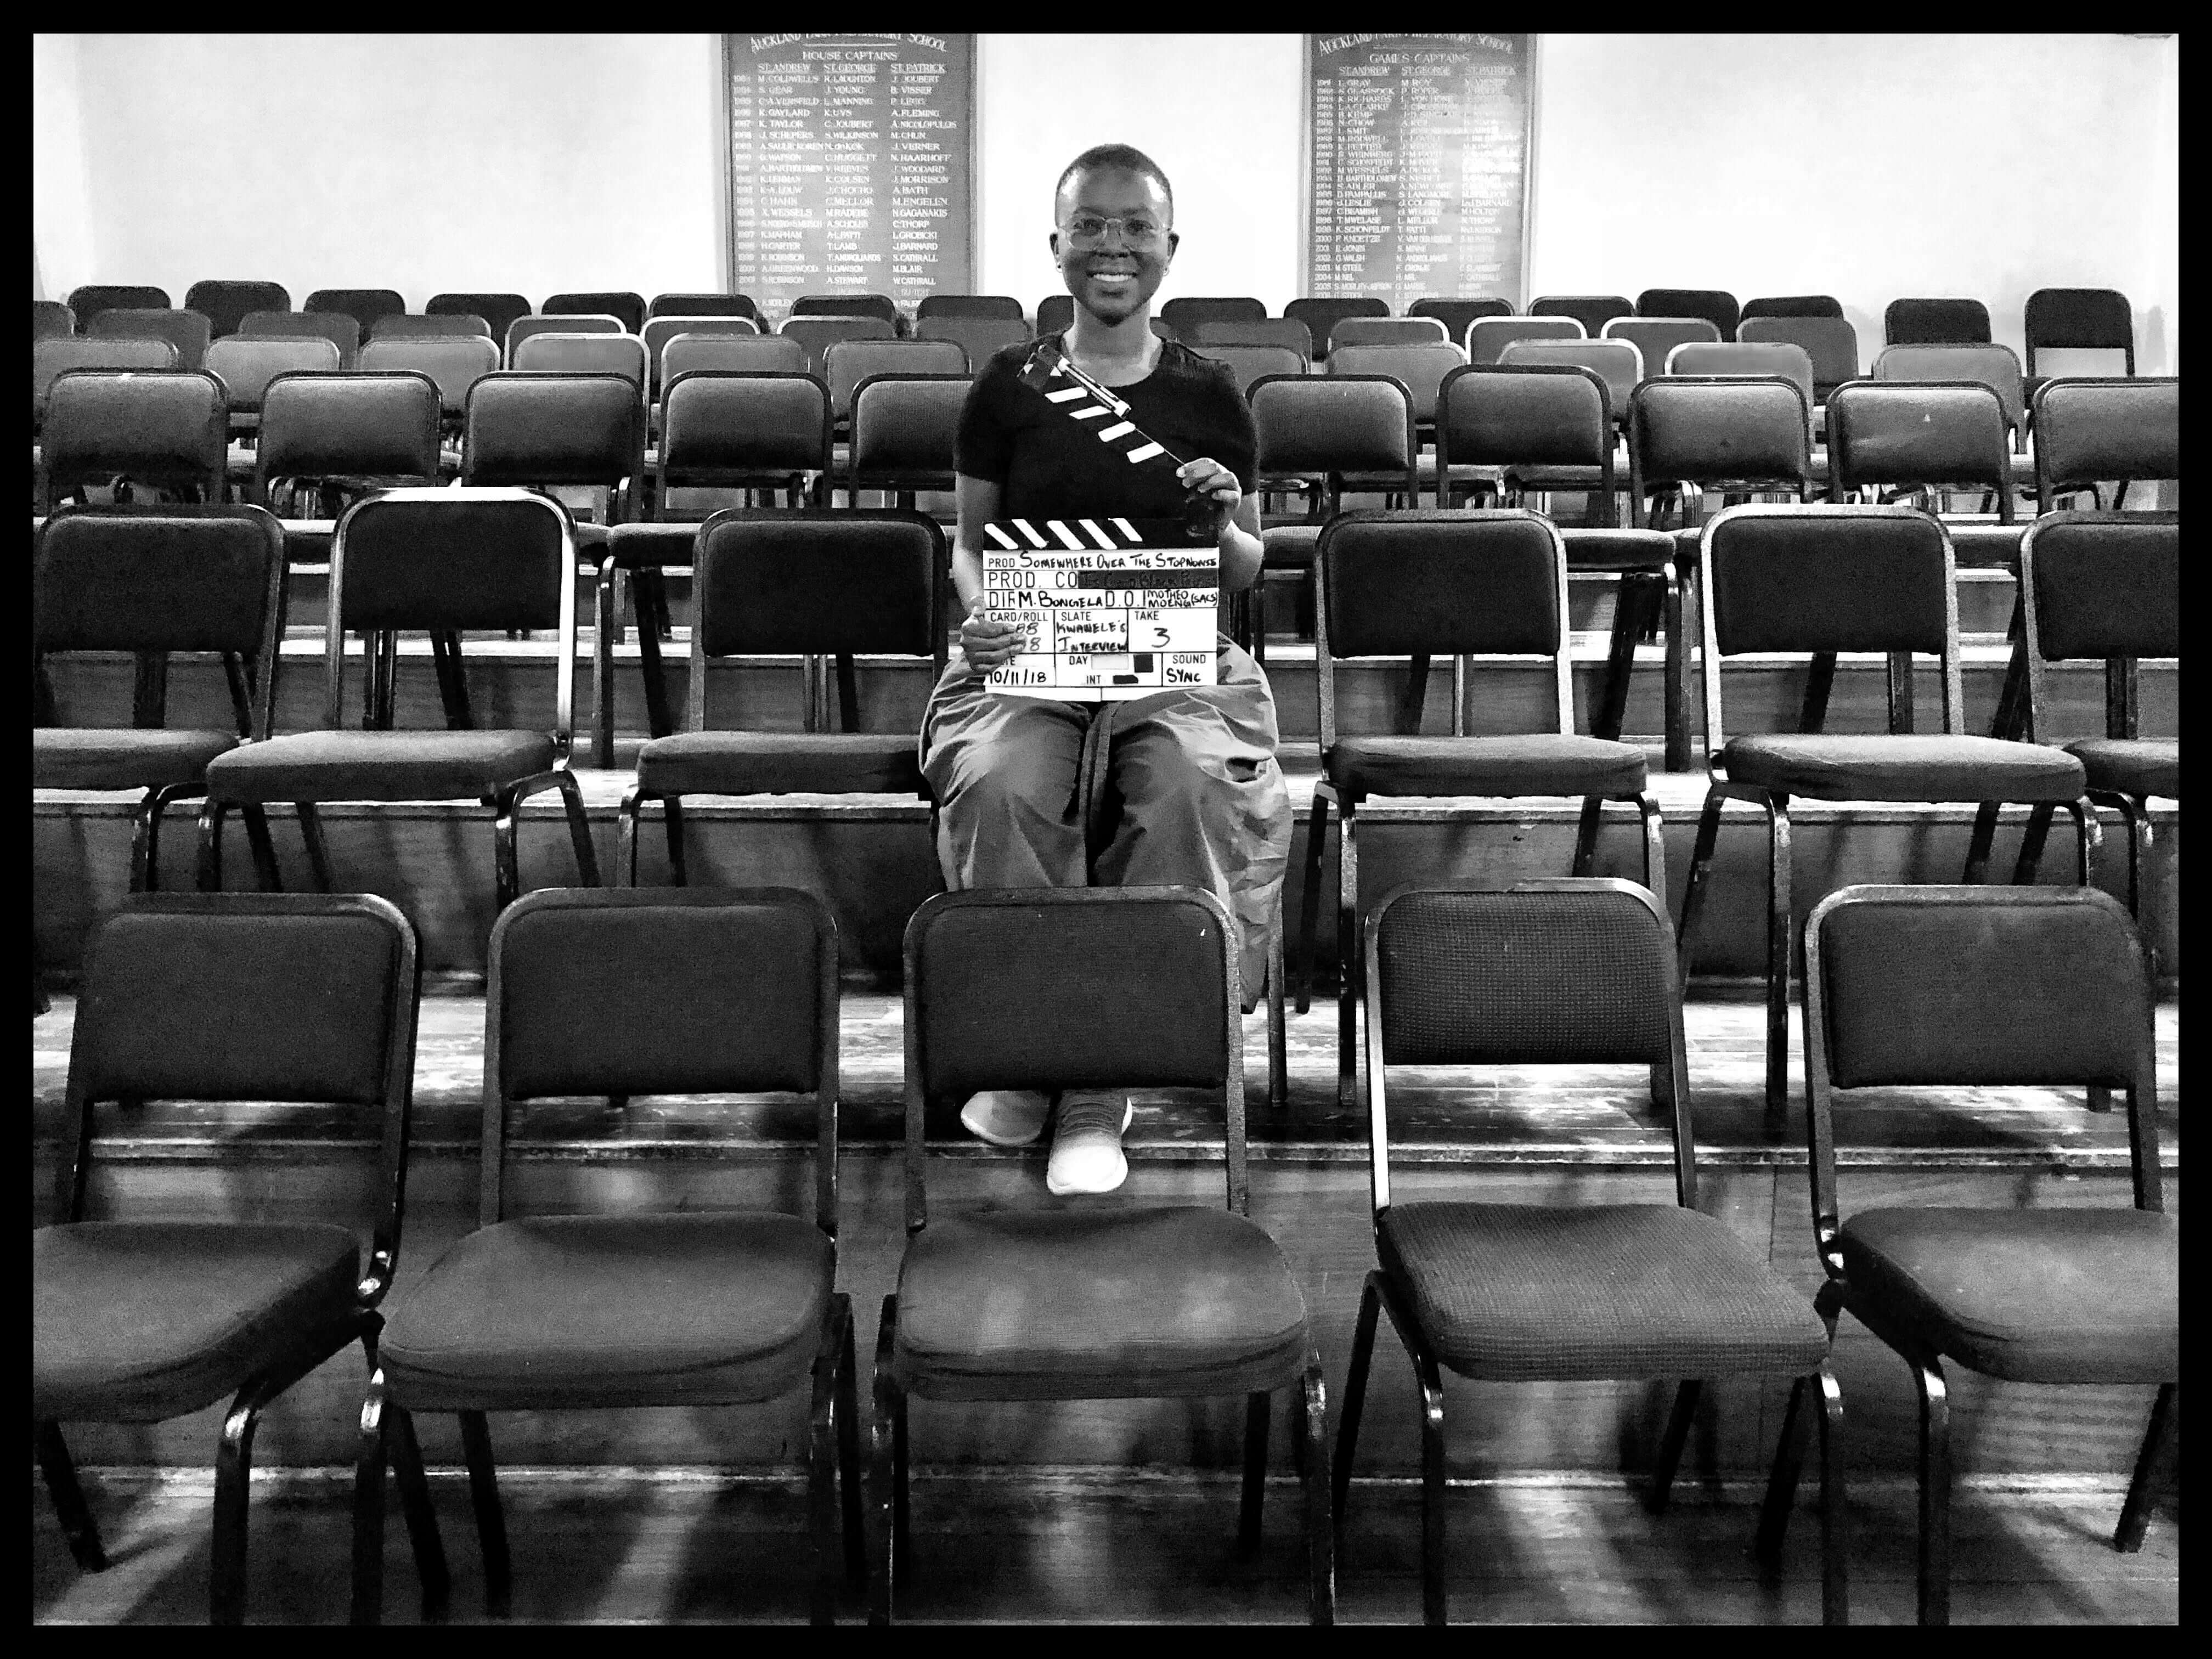 Still from Milisuthando (working title). Milisuthando is sitting amongst a few rows of chairs, smiling, and holding a film clapperboard. Black and white photo.